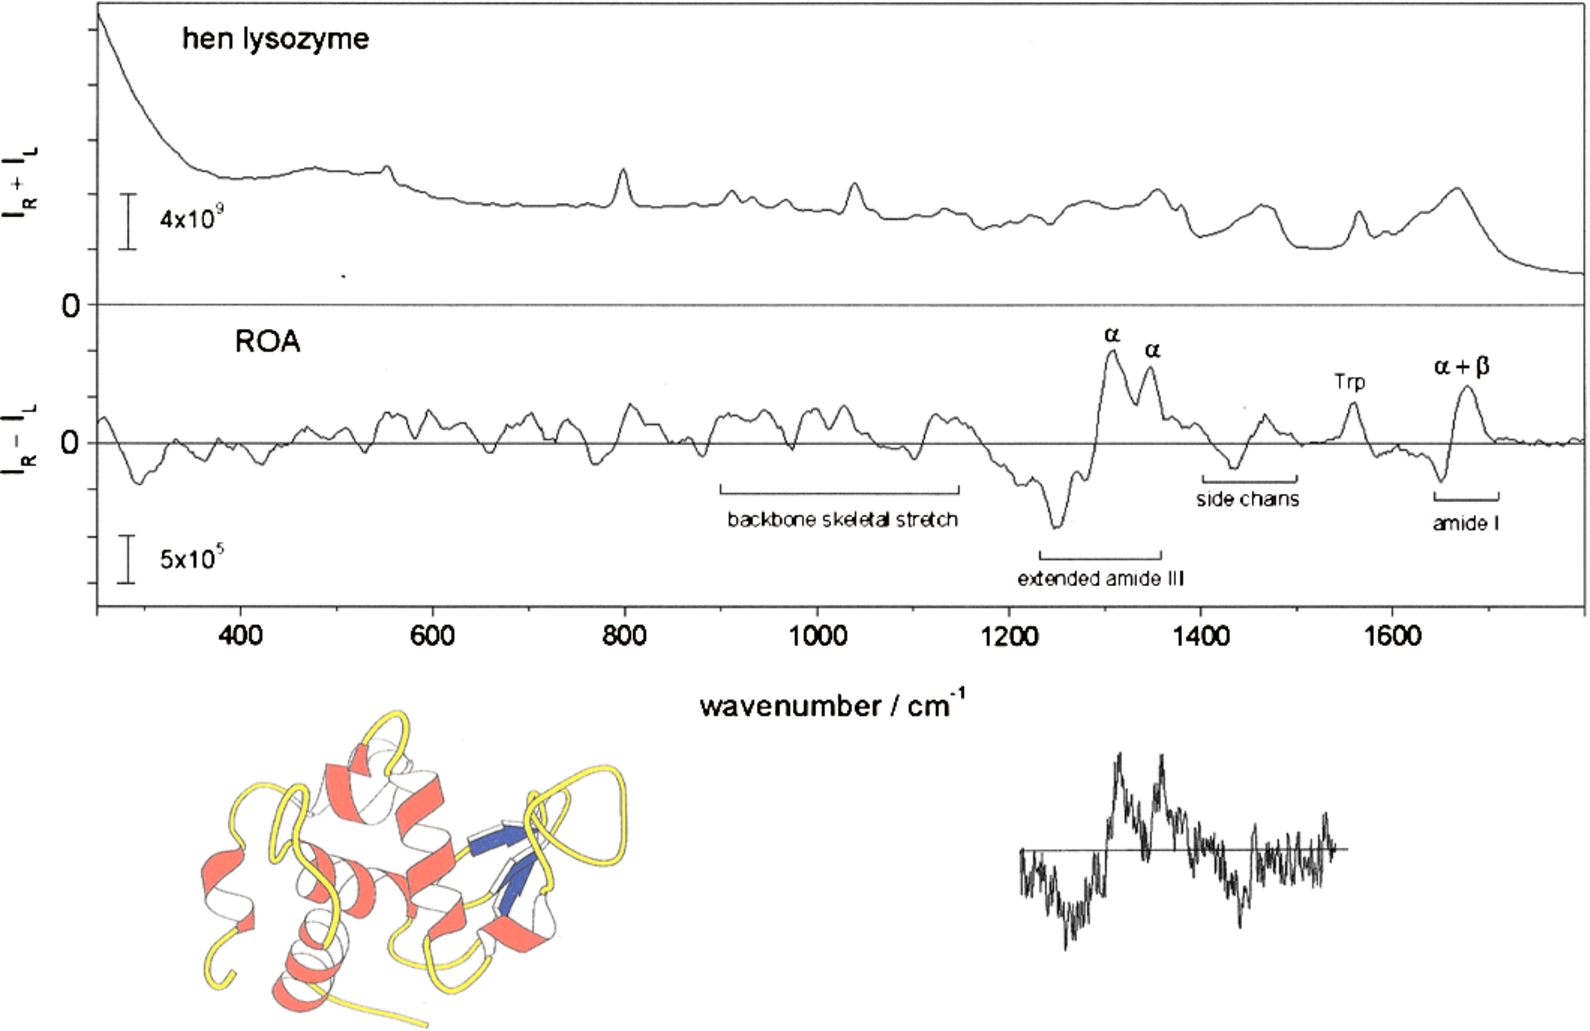 The backscattered Raman and ROA spectra of hen lysozyme in aqueous solution measured on a modern SCP instrument, together with our first protein ROA spectrum recorded with an ICP instrument in 1990 in the ∼1200–1450 cm−1 range taken from [19]. (Colors are visible in the online version of the article; http://dx.doi.org/10.3233/BSI-150113.)